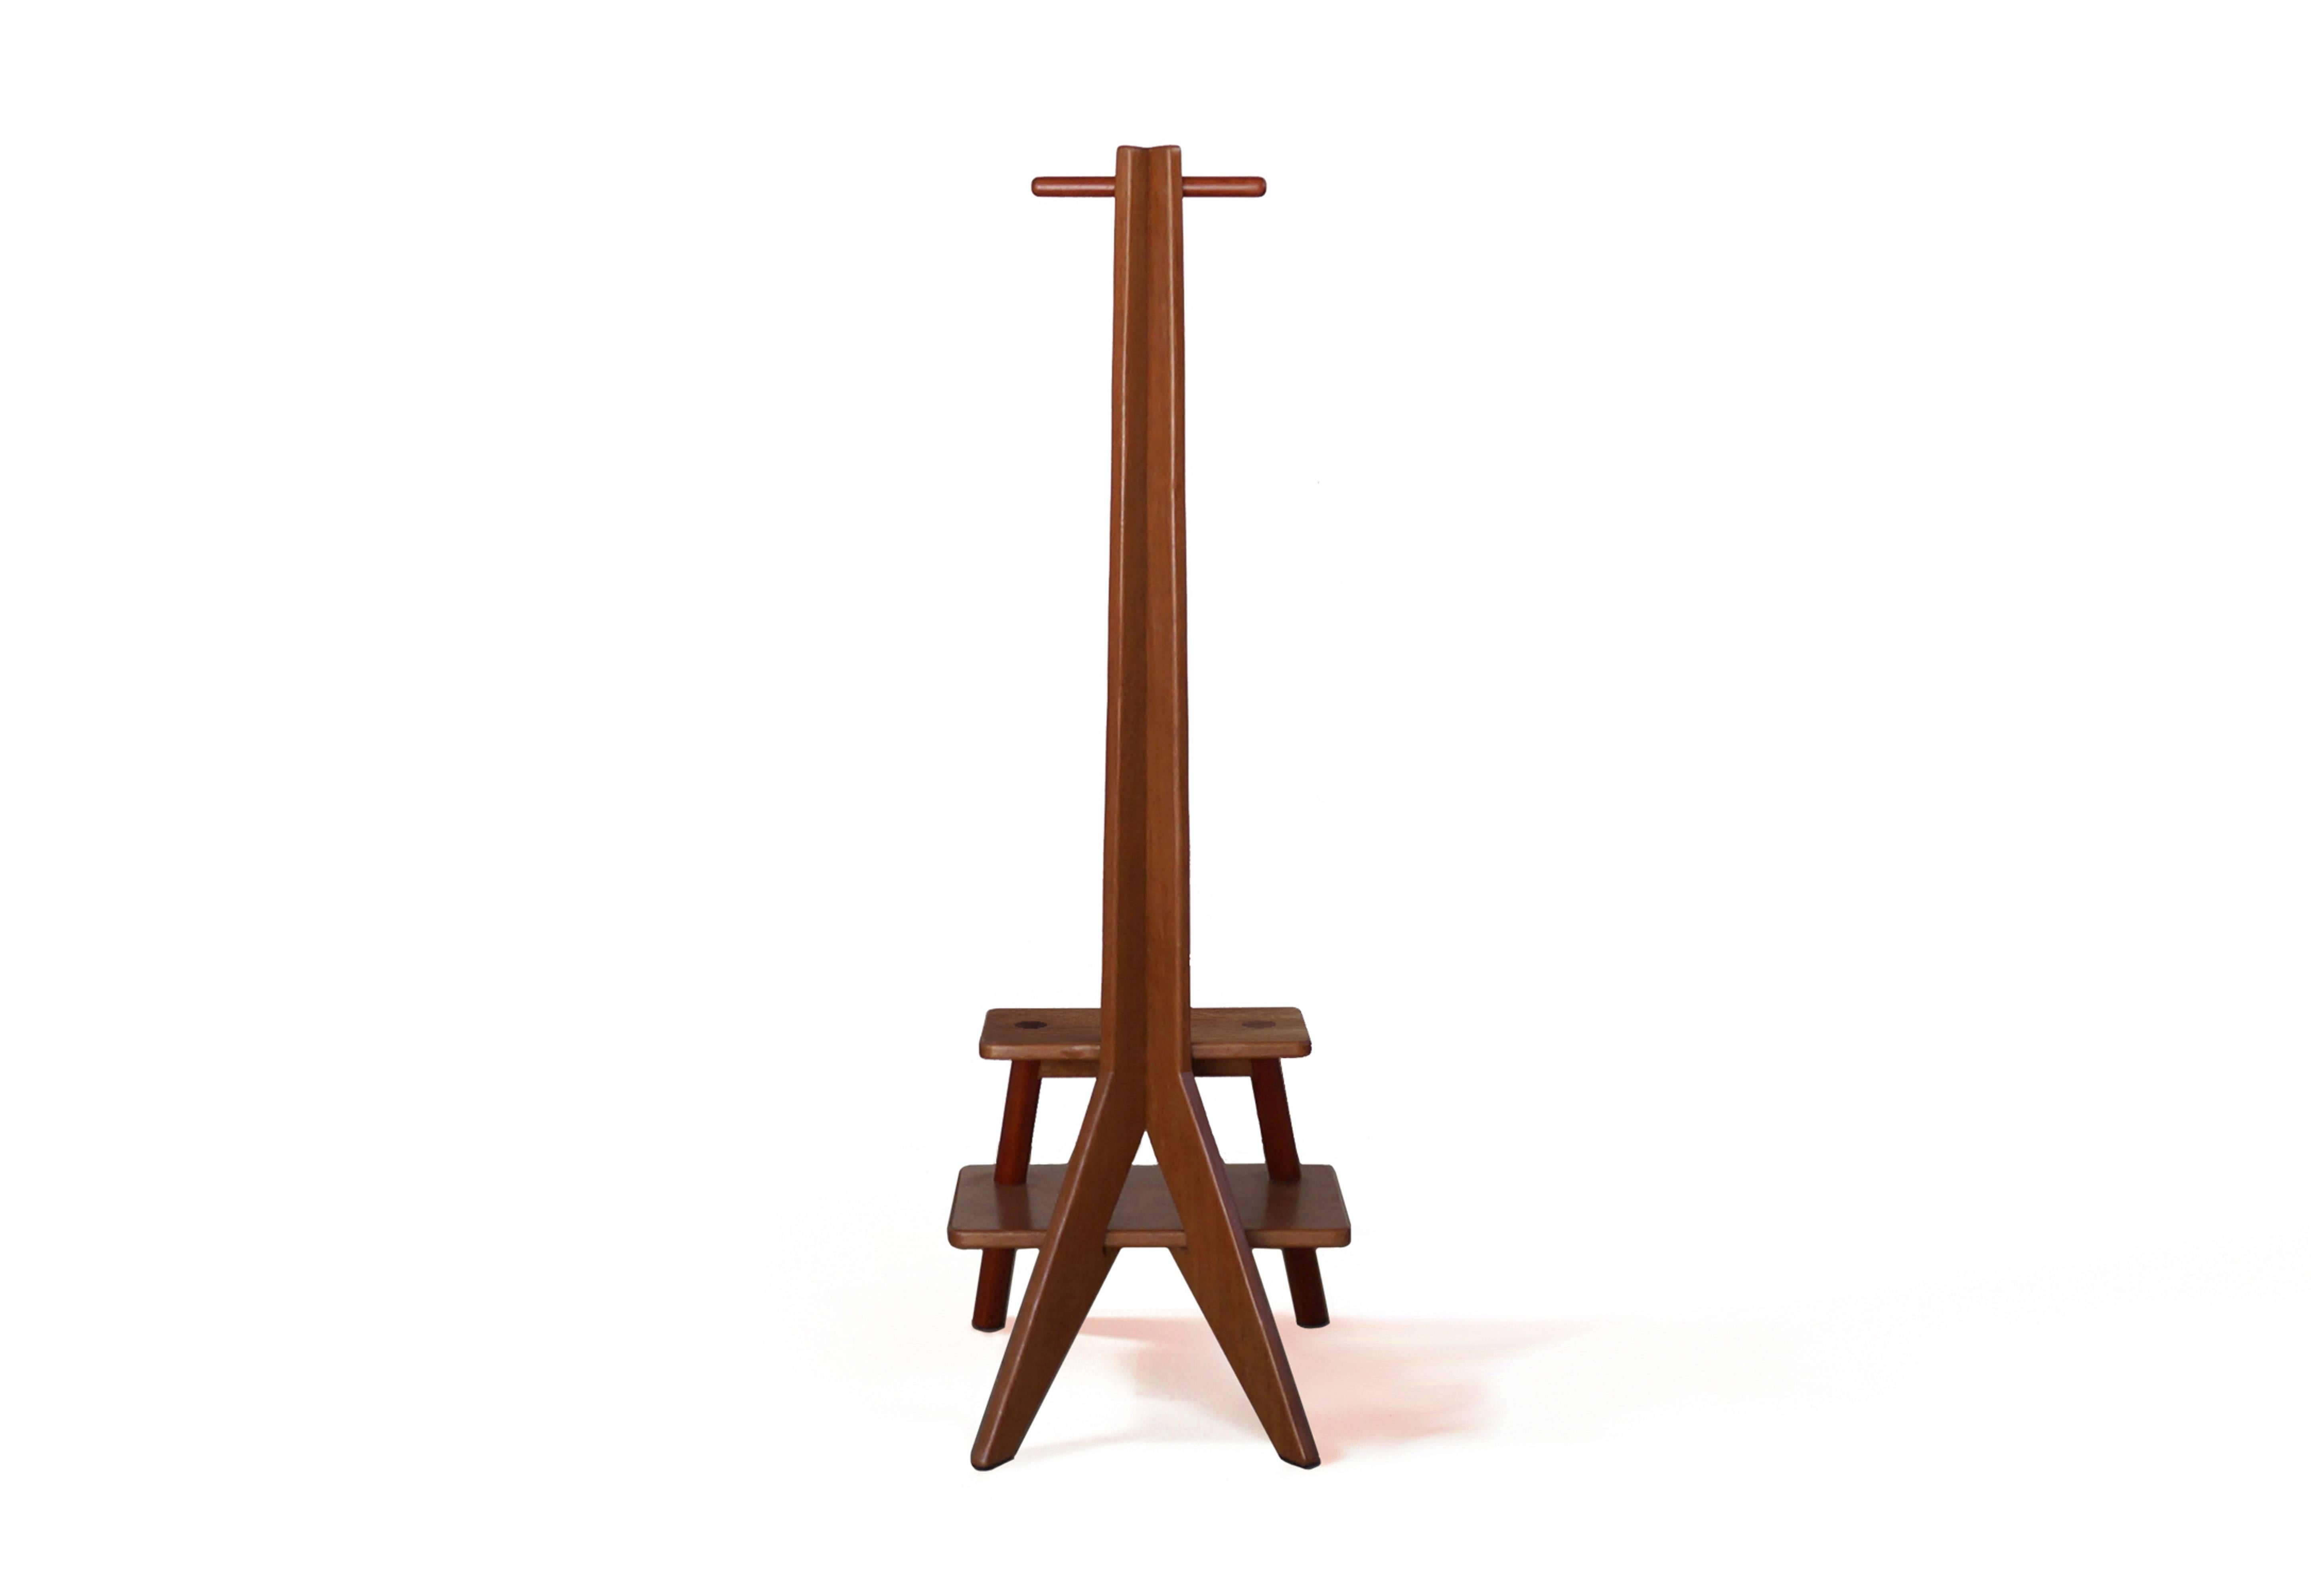 Hand-Crafted Girafa Ladder and Hanger in Hardwood, Brazilian Contemporary Design For Sale